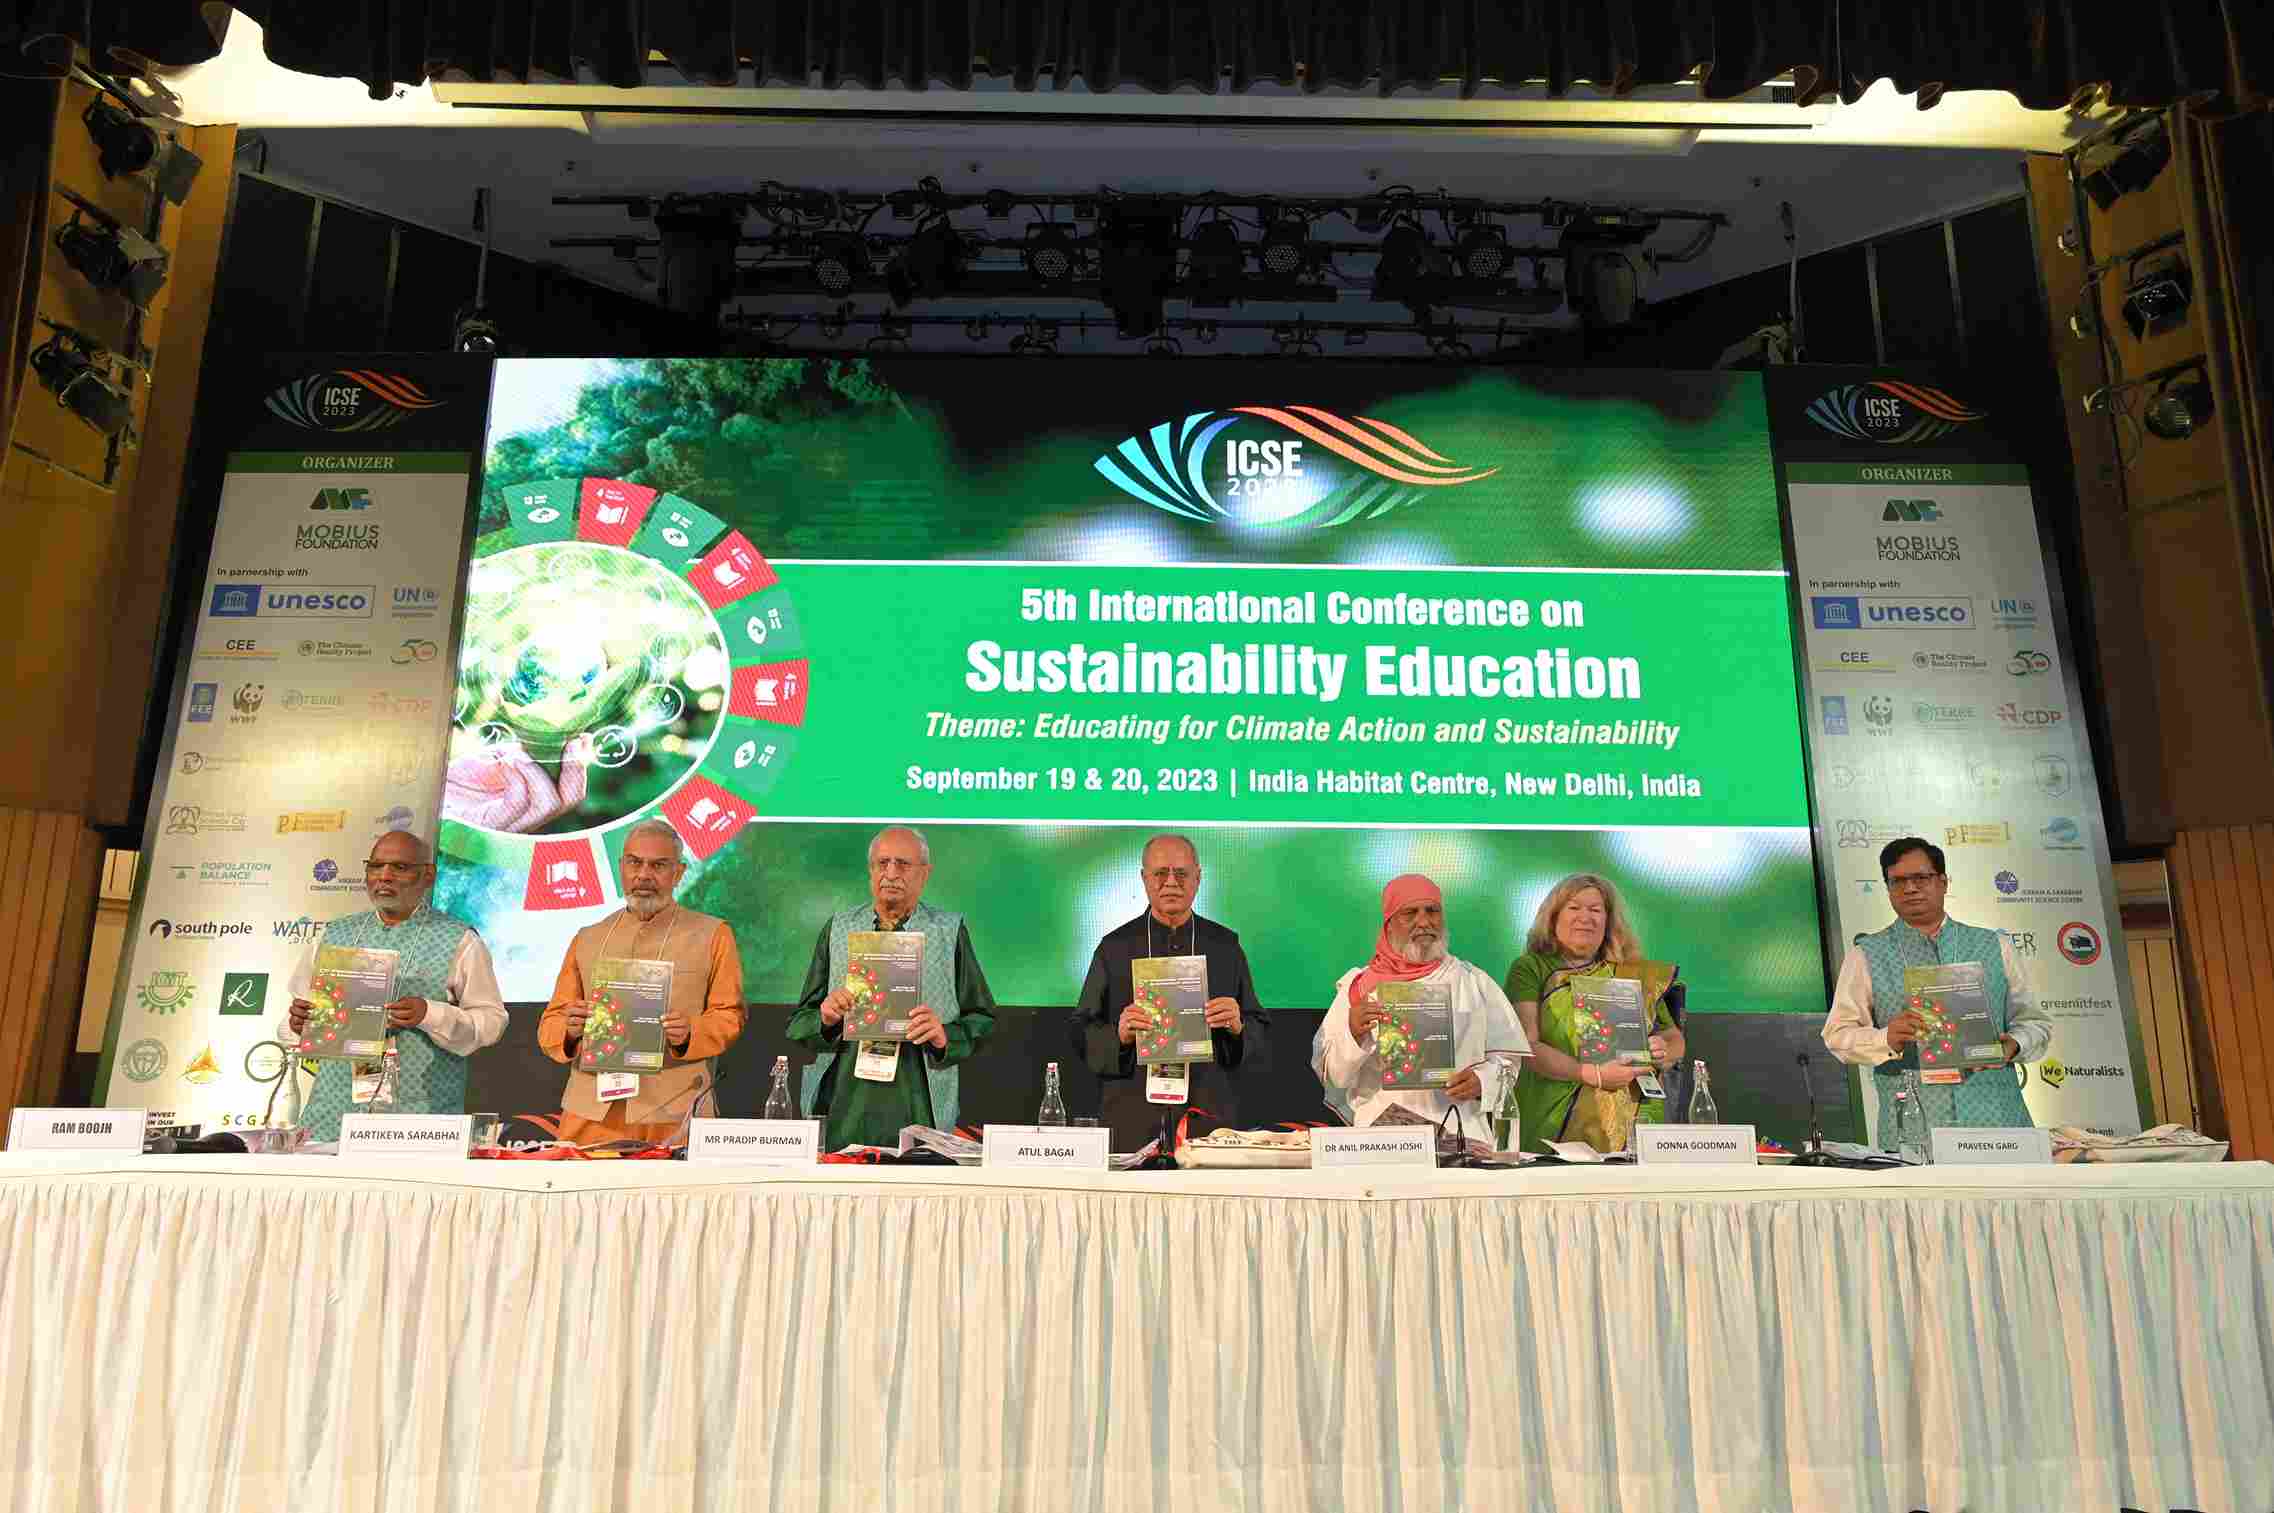 Dignitaries at the 5th International Conference on Sustainability Education